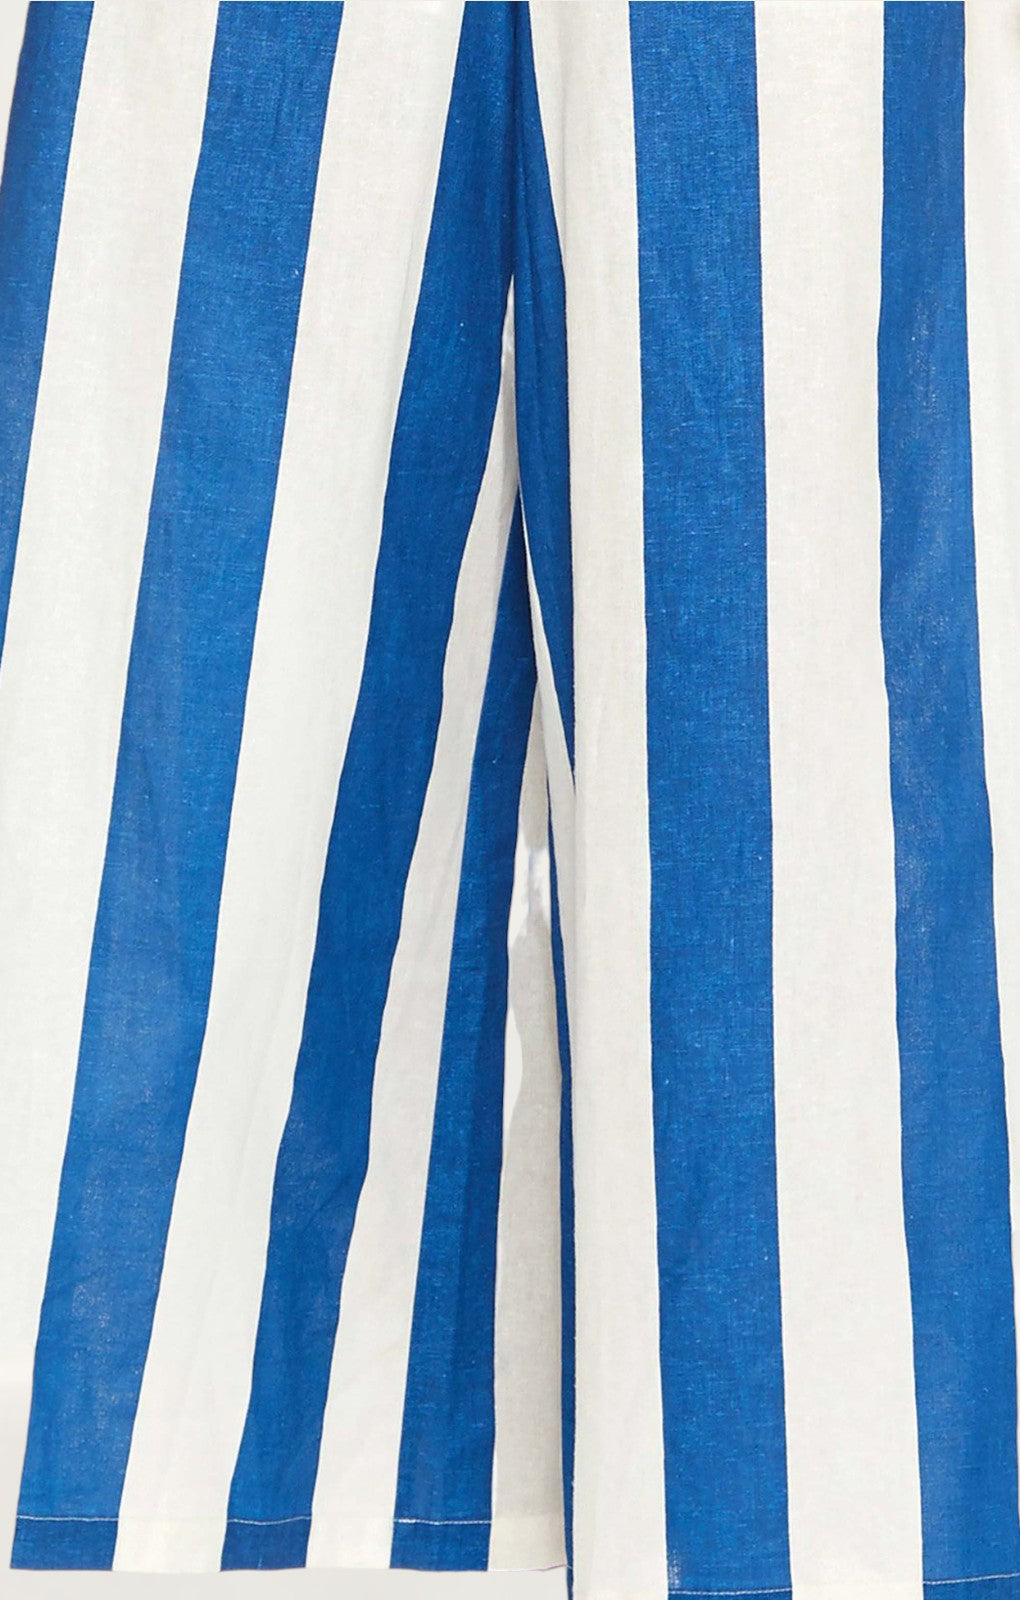 Talulah Blue And White Striped Jumpsuit product image